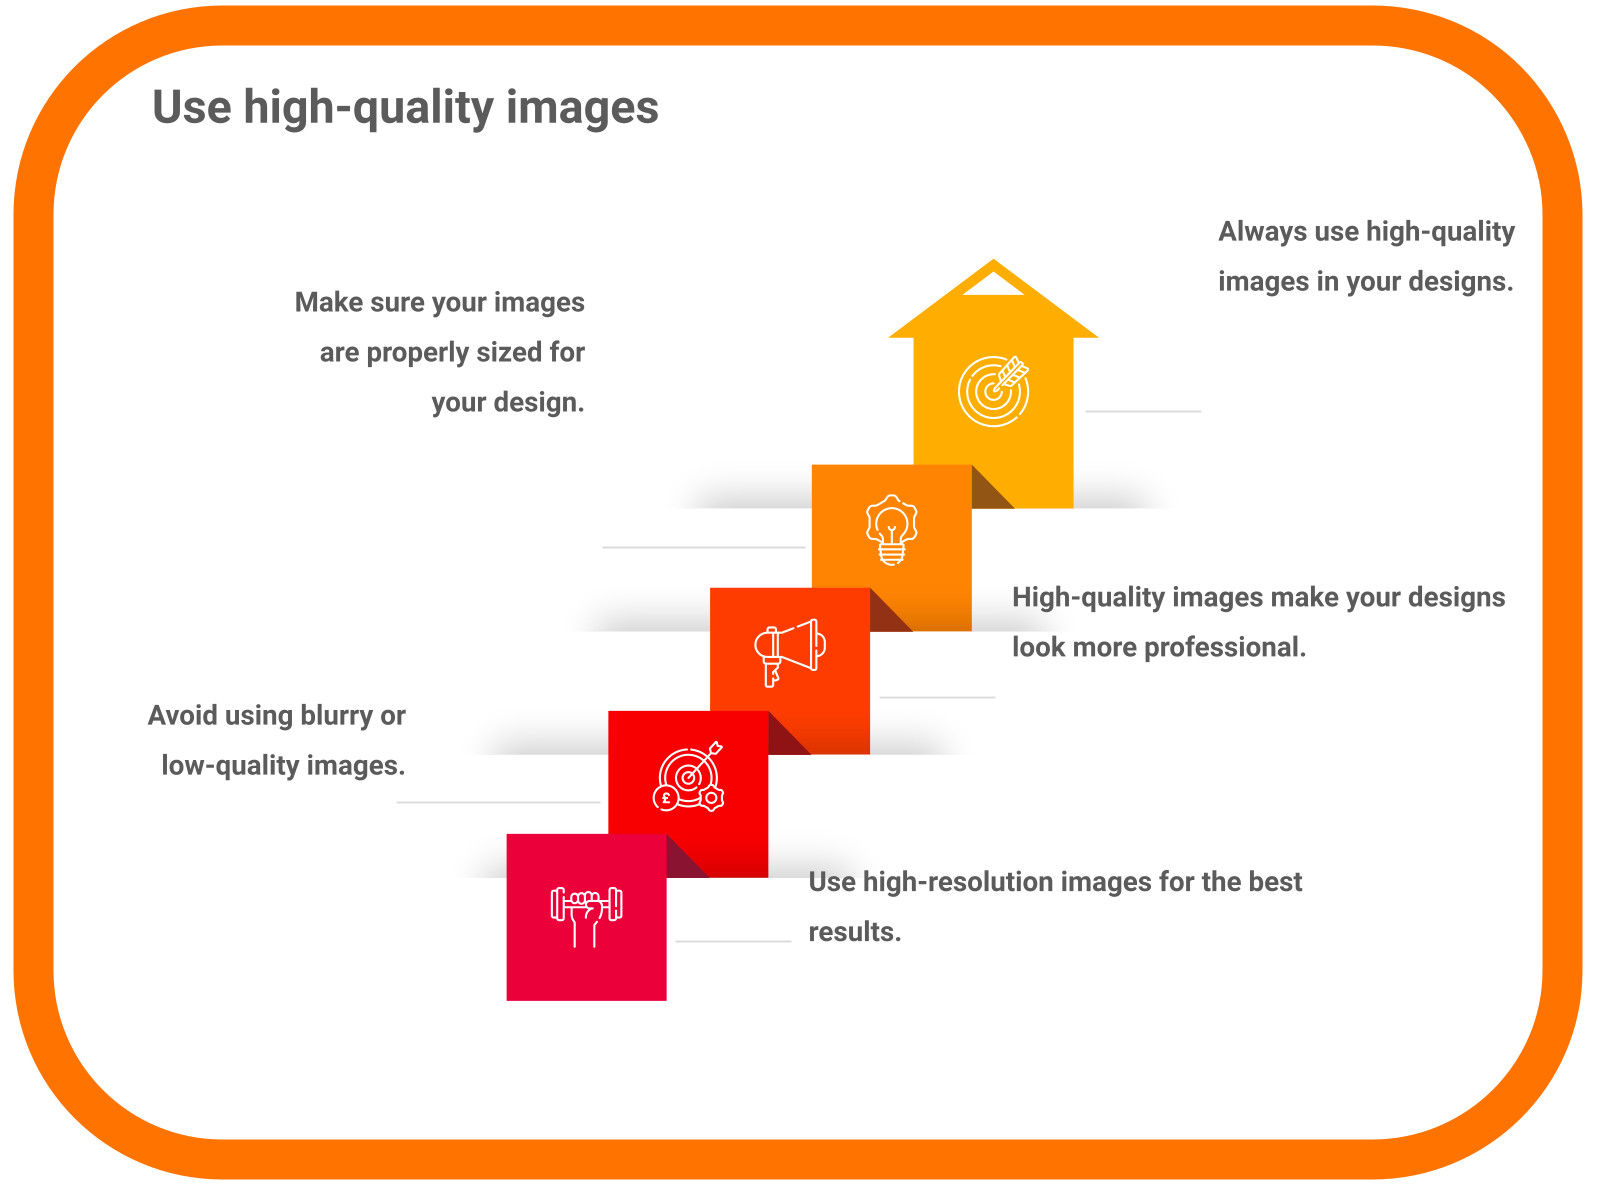 Use high-quality images